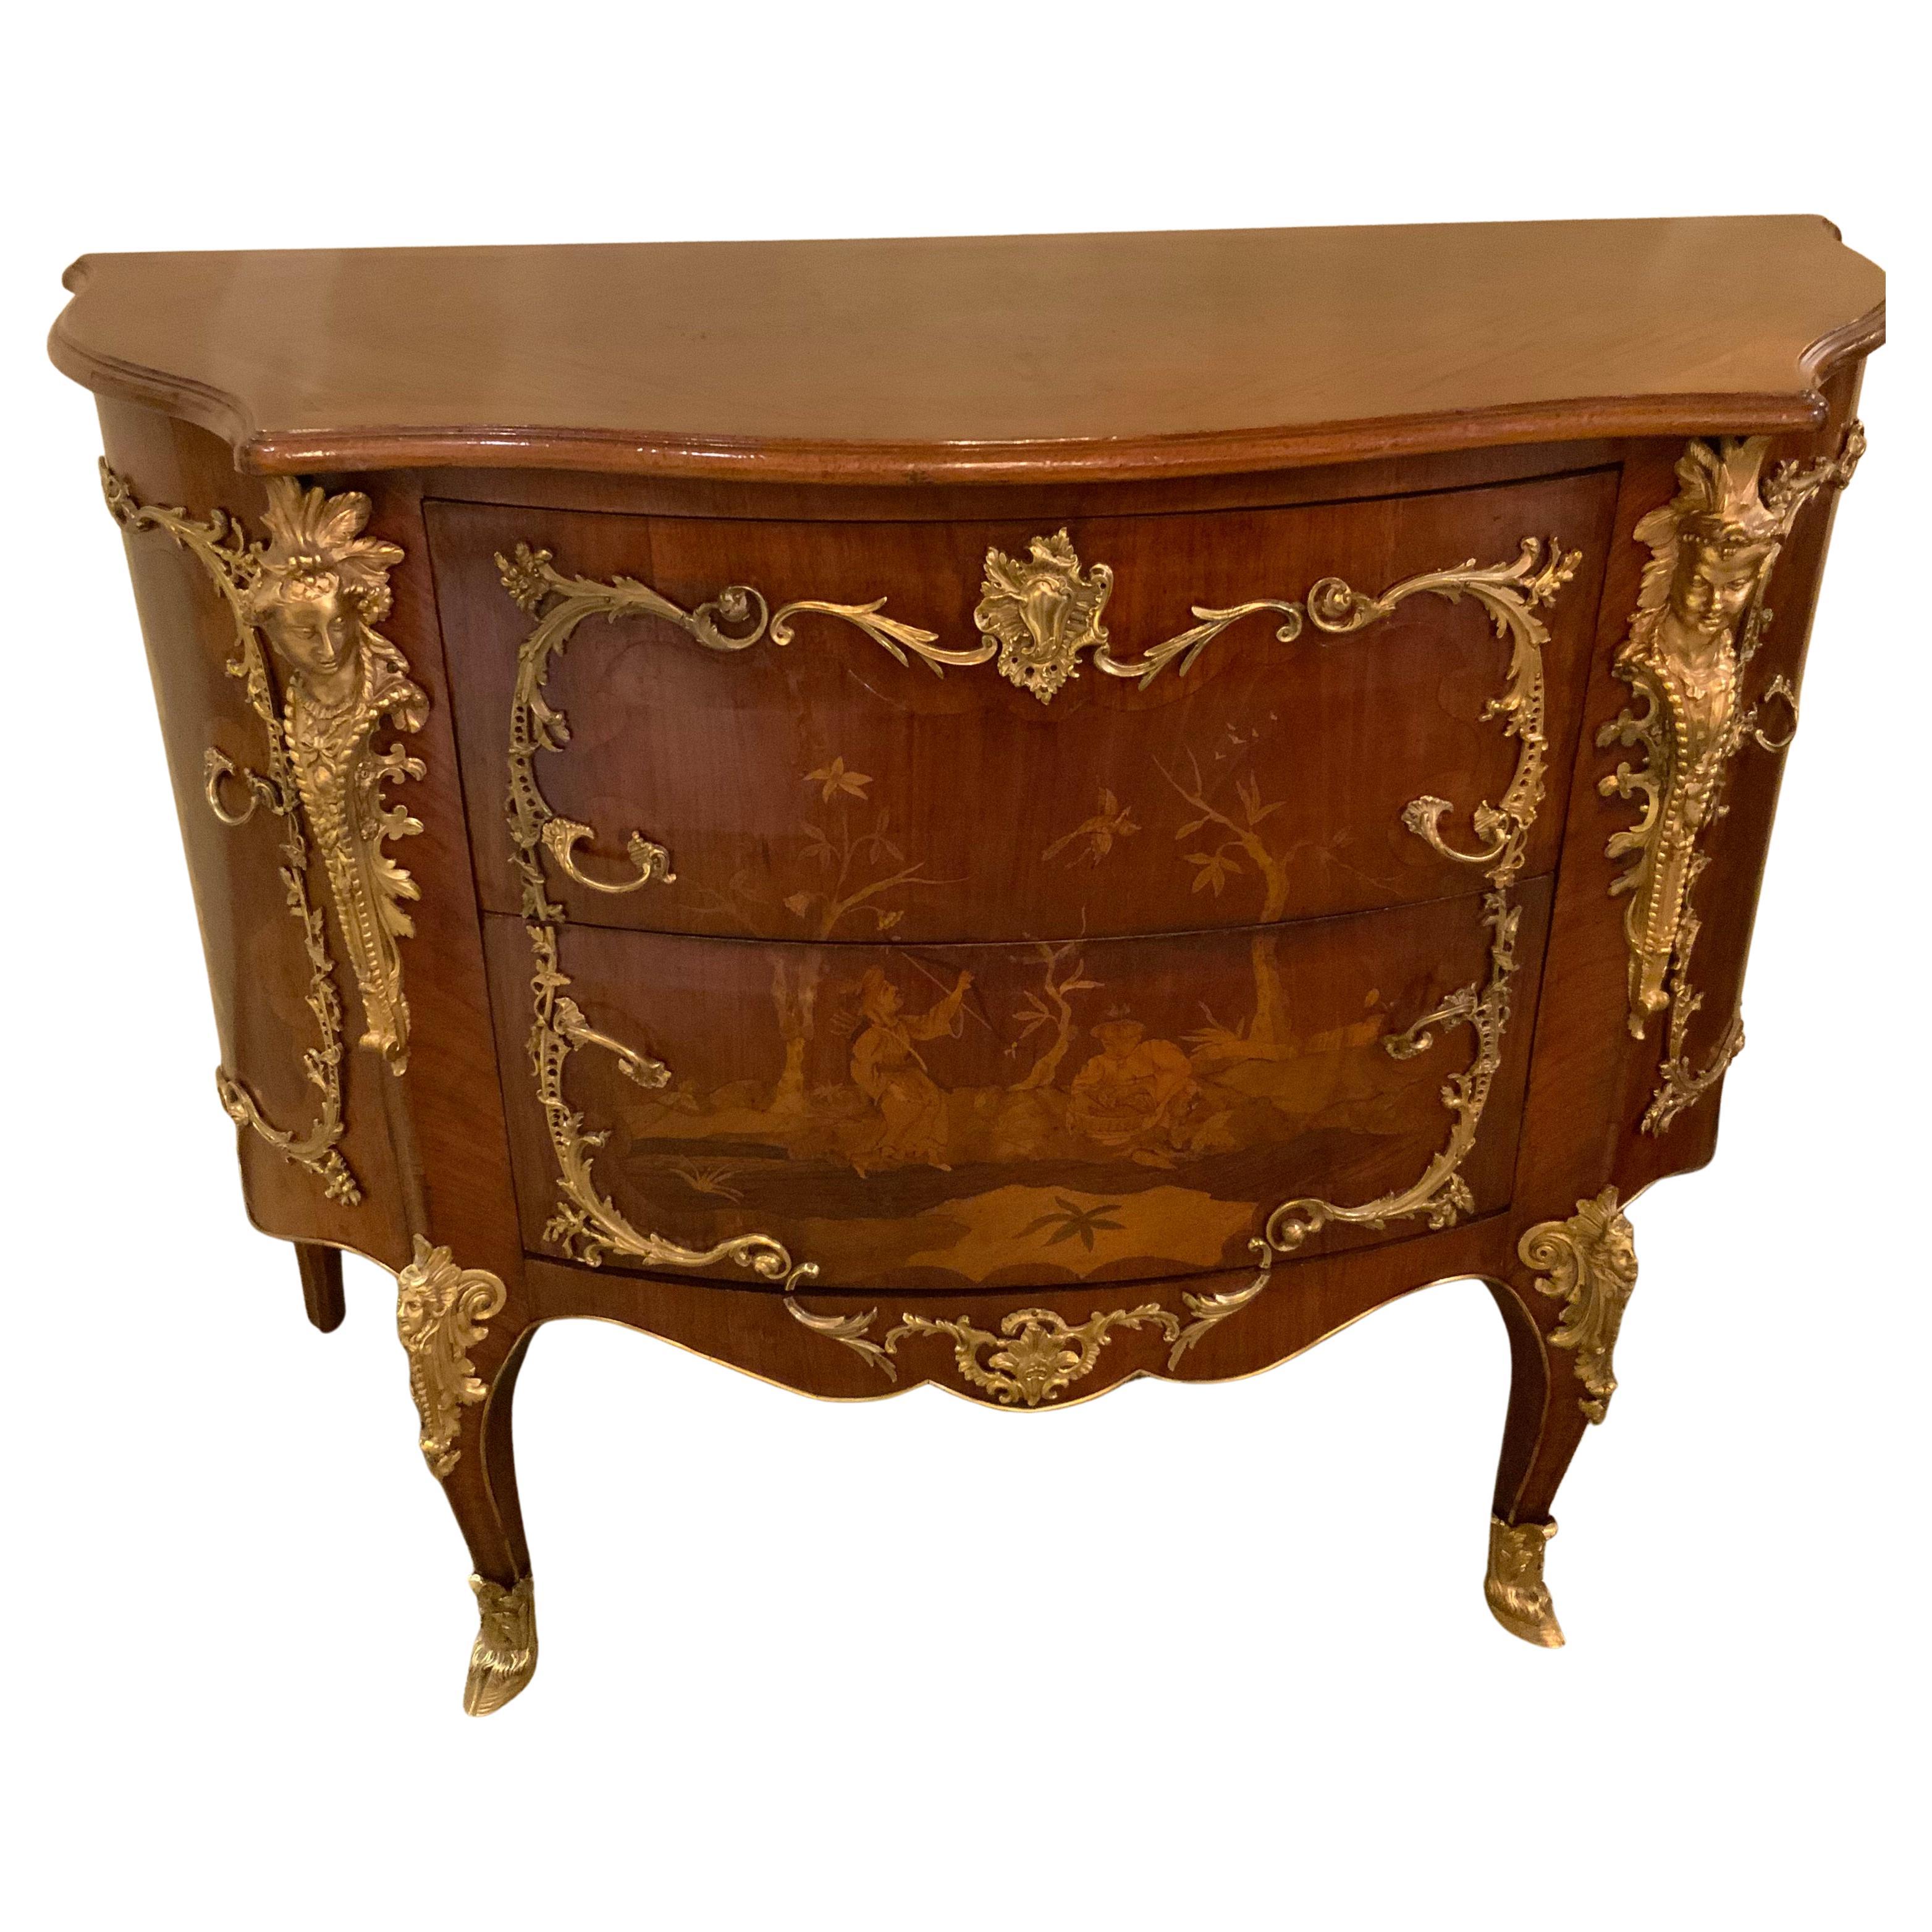 Pair of Louis XIV-Style Mahogany Inlaid Marquetry Commodes, 19th Century